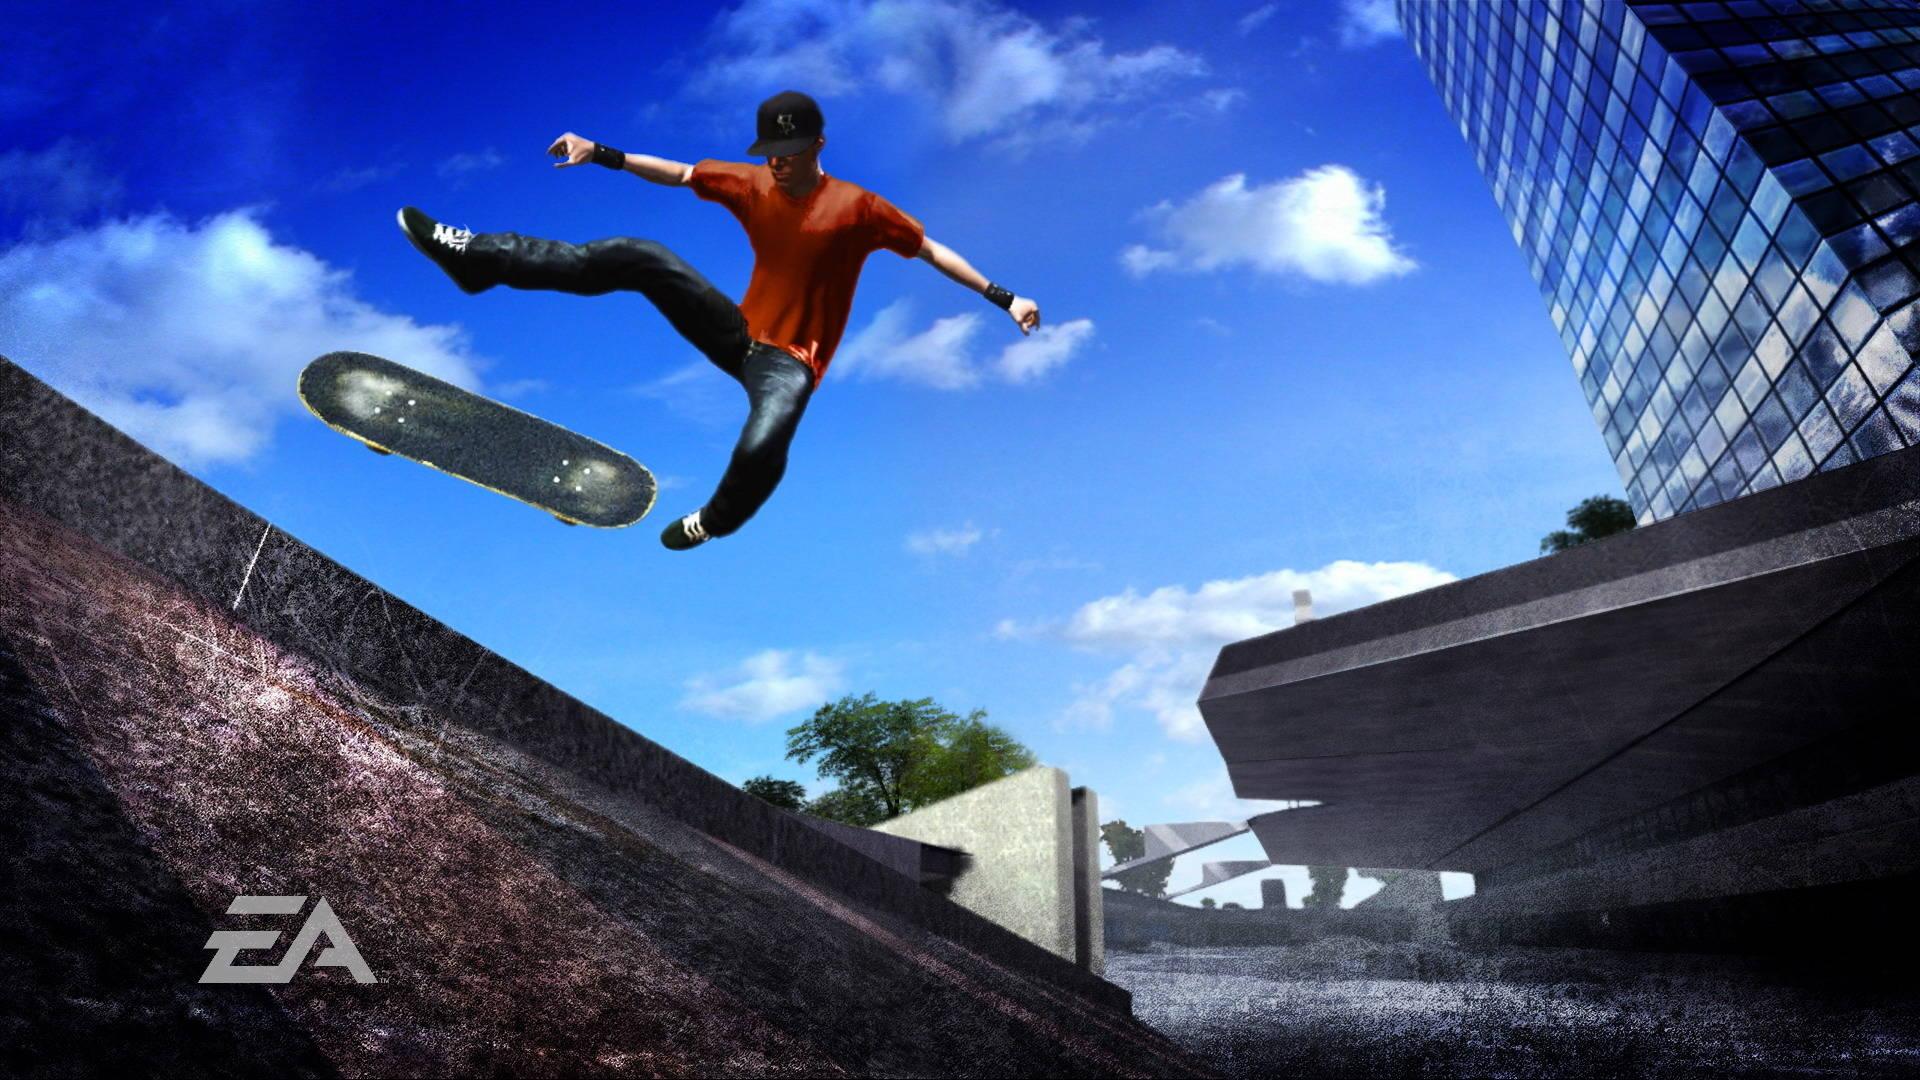 skate 3 for pc free download